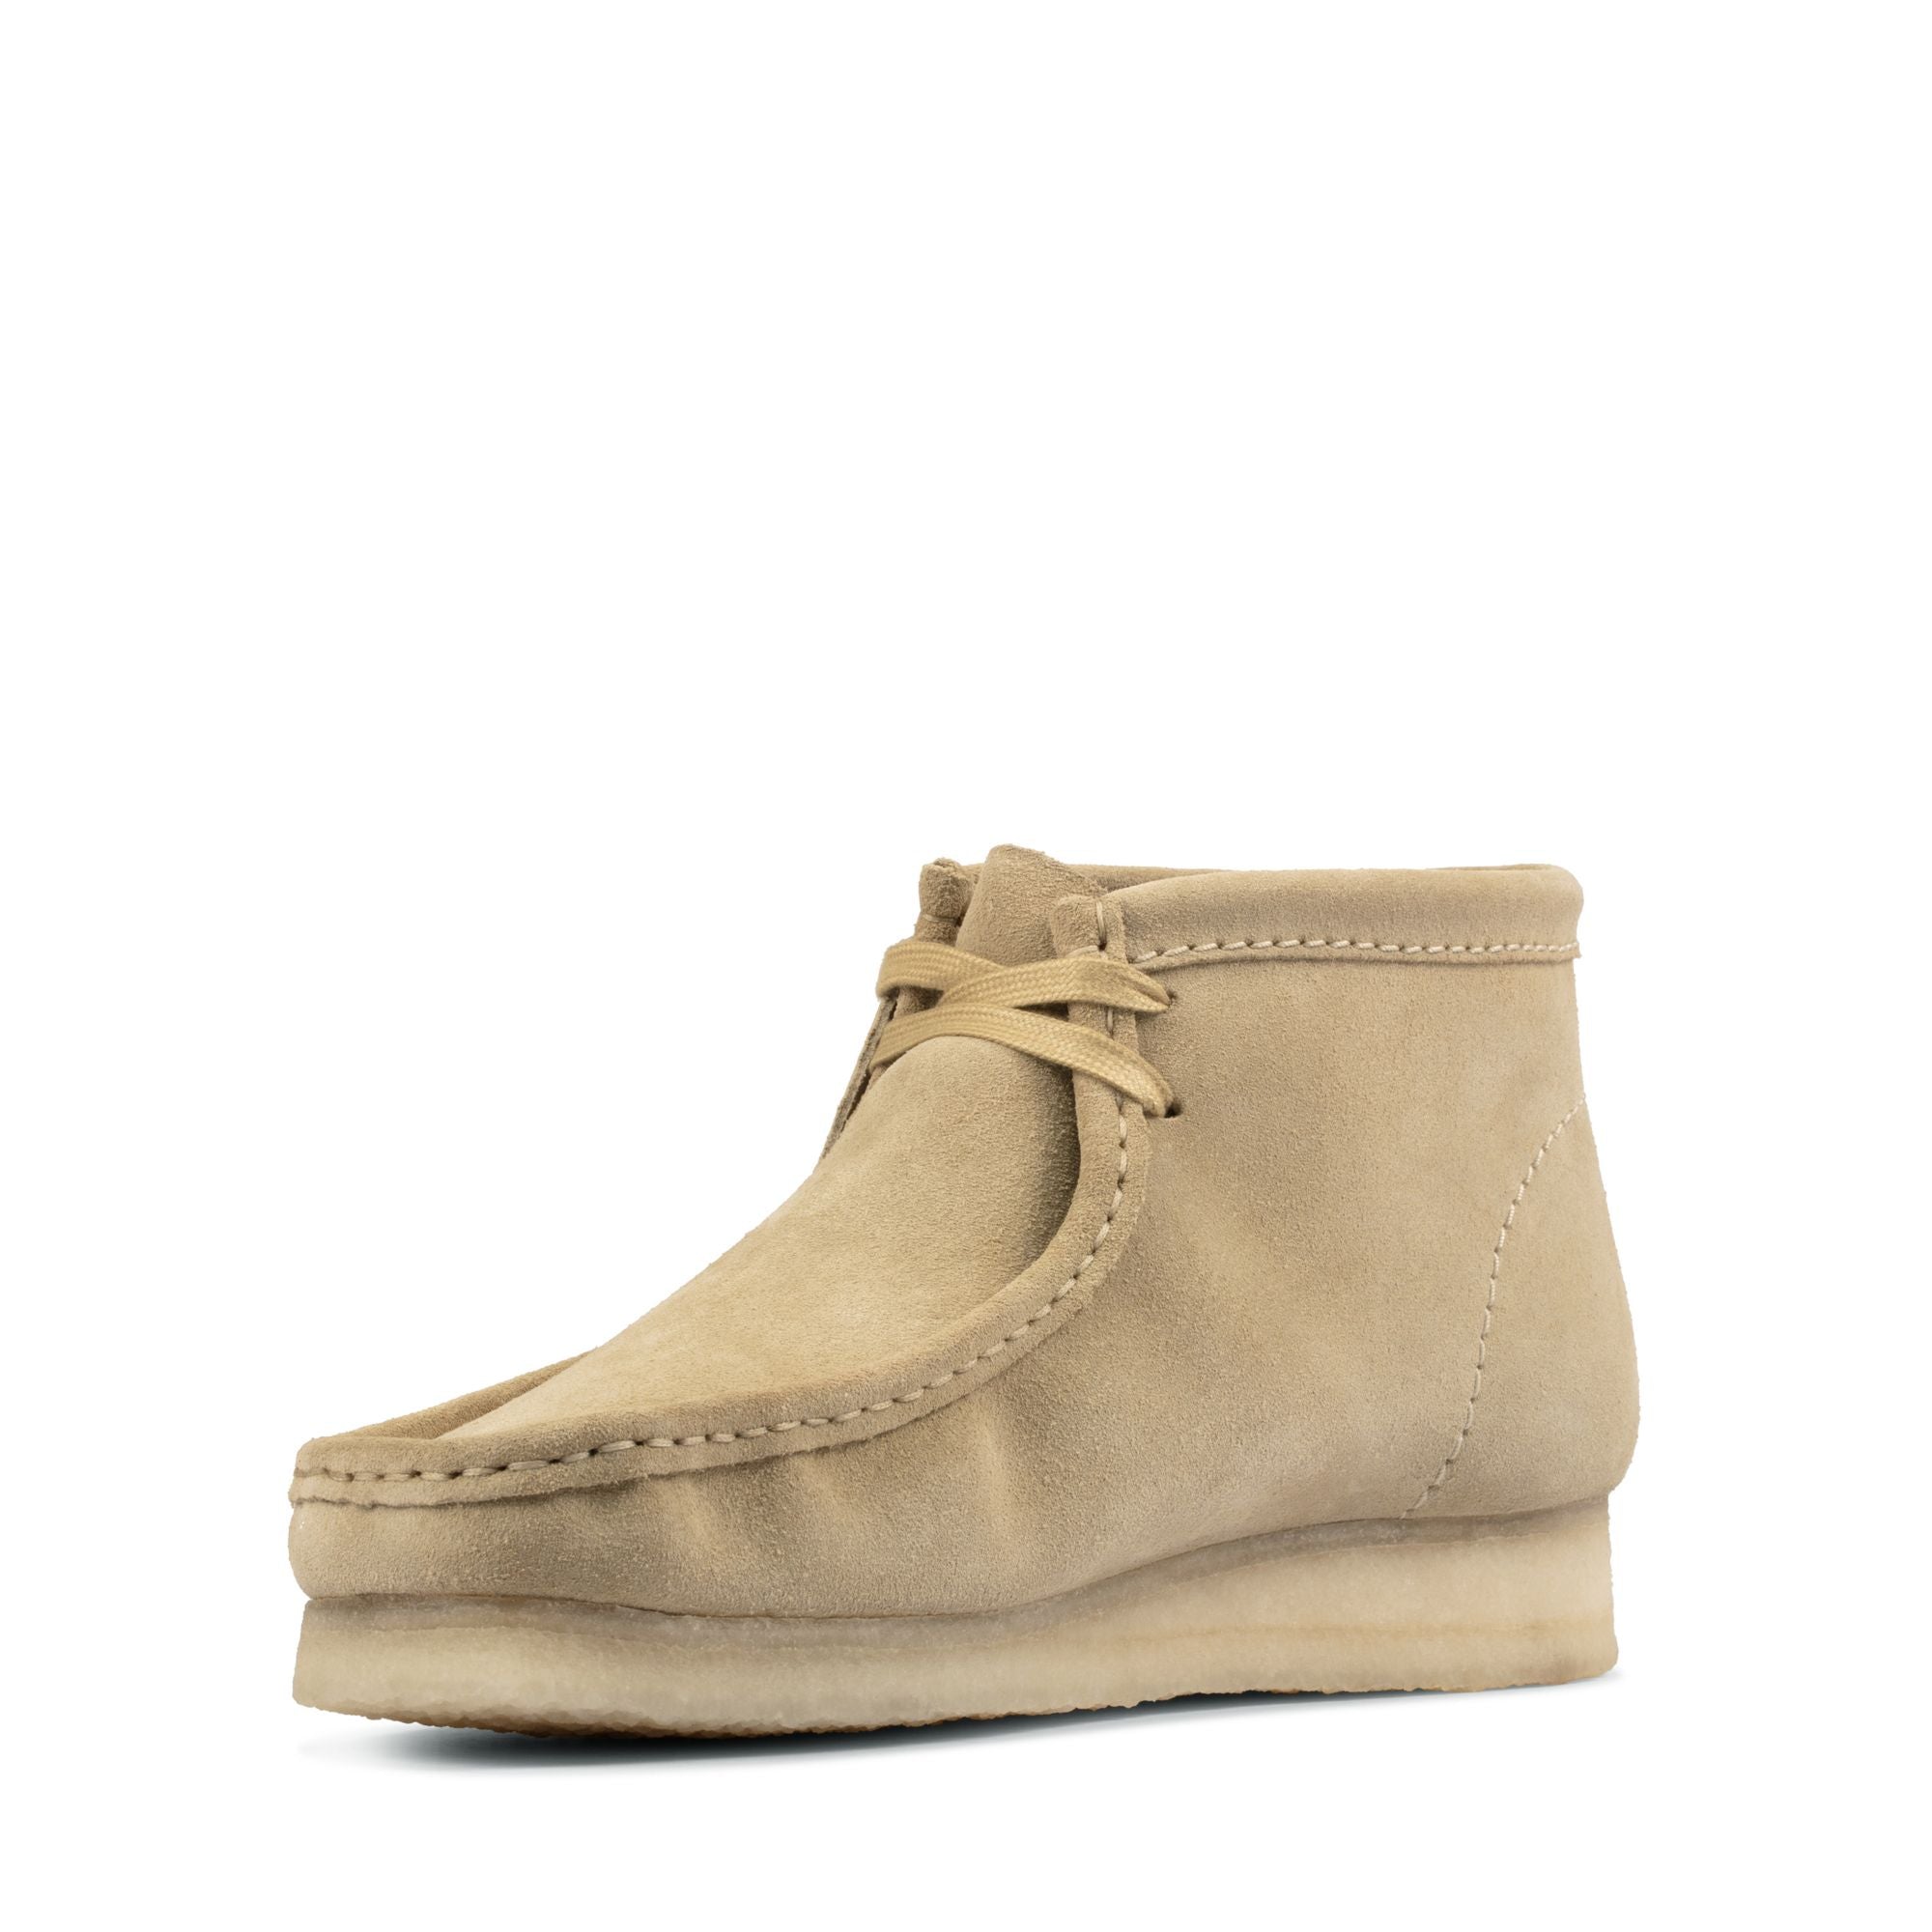 W-T (Wallabee boot maple suede) 522913041 WALLABEES